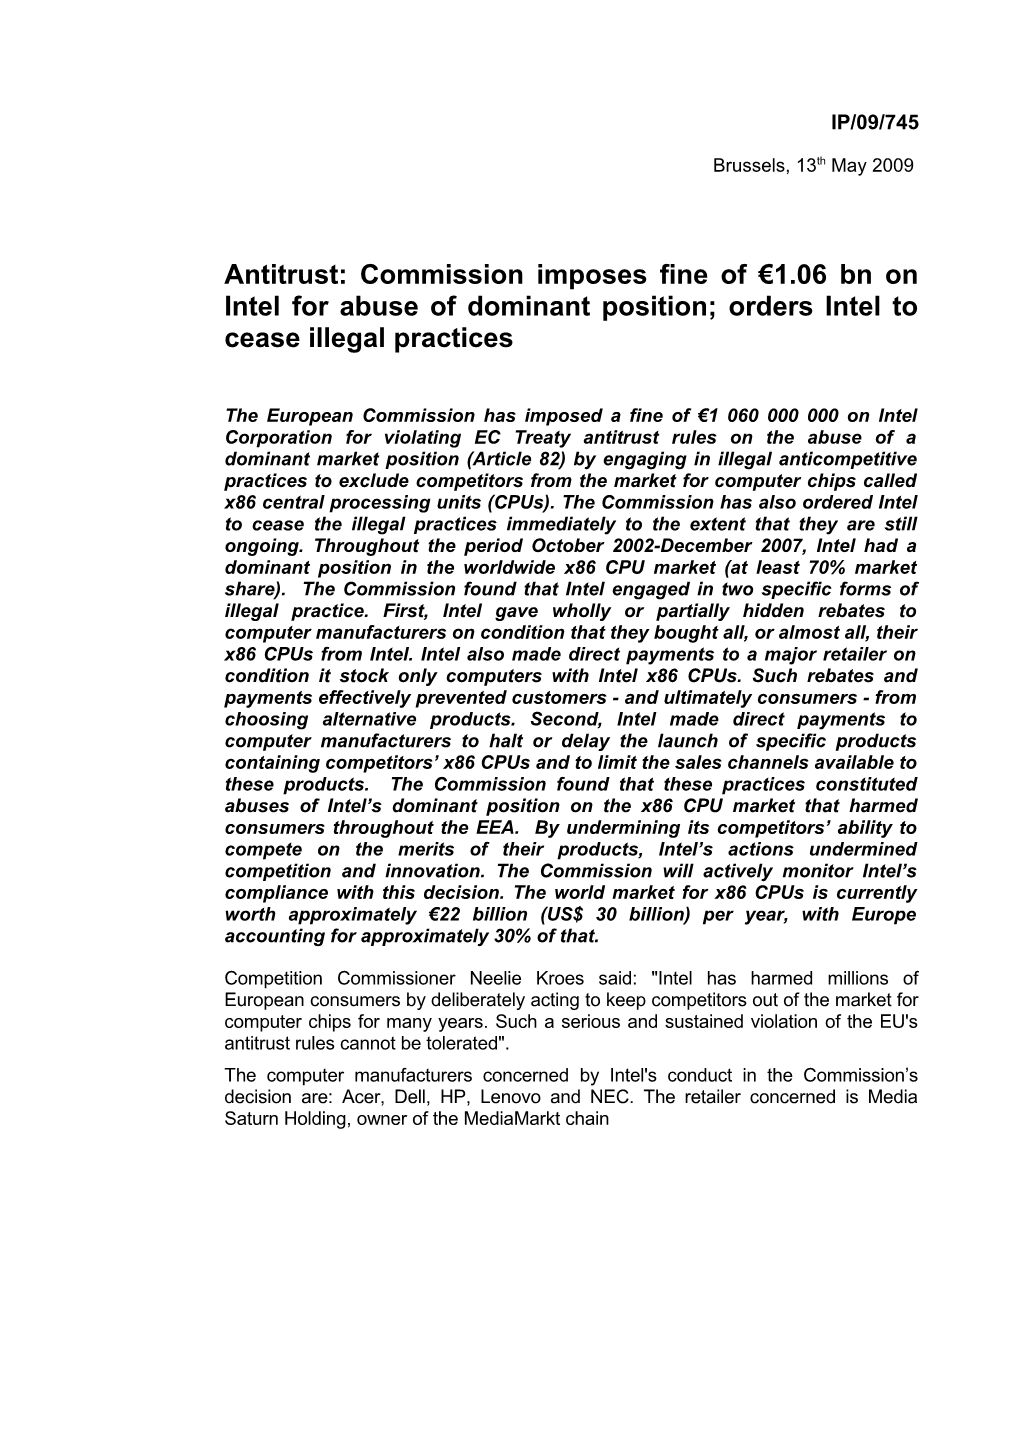 Antitrust: Commission Imposes Fine of 1.06 Bn on Intel for Abuse of Dominant Position;